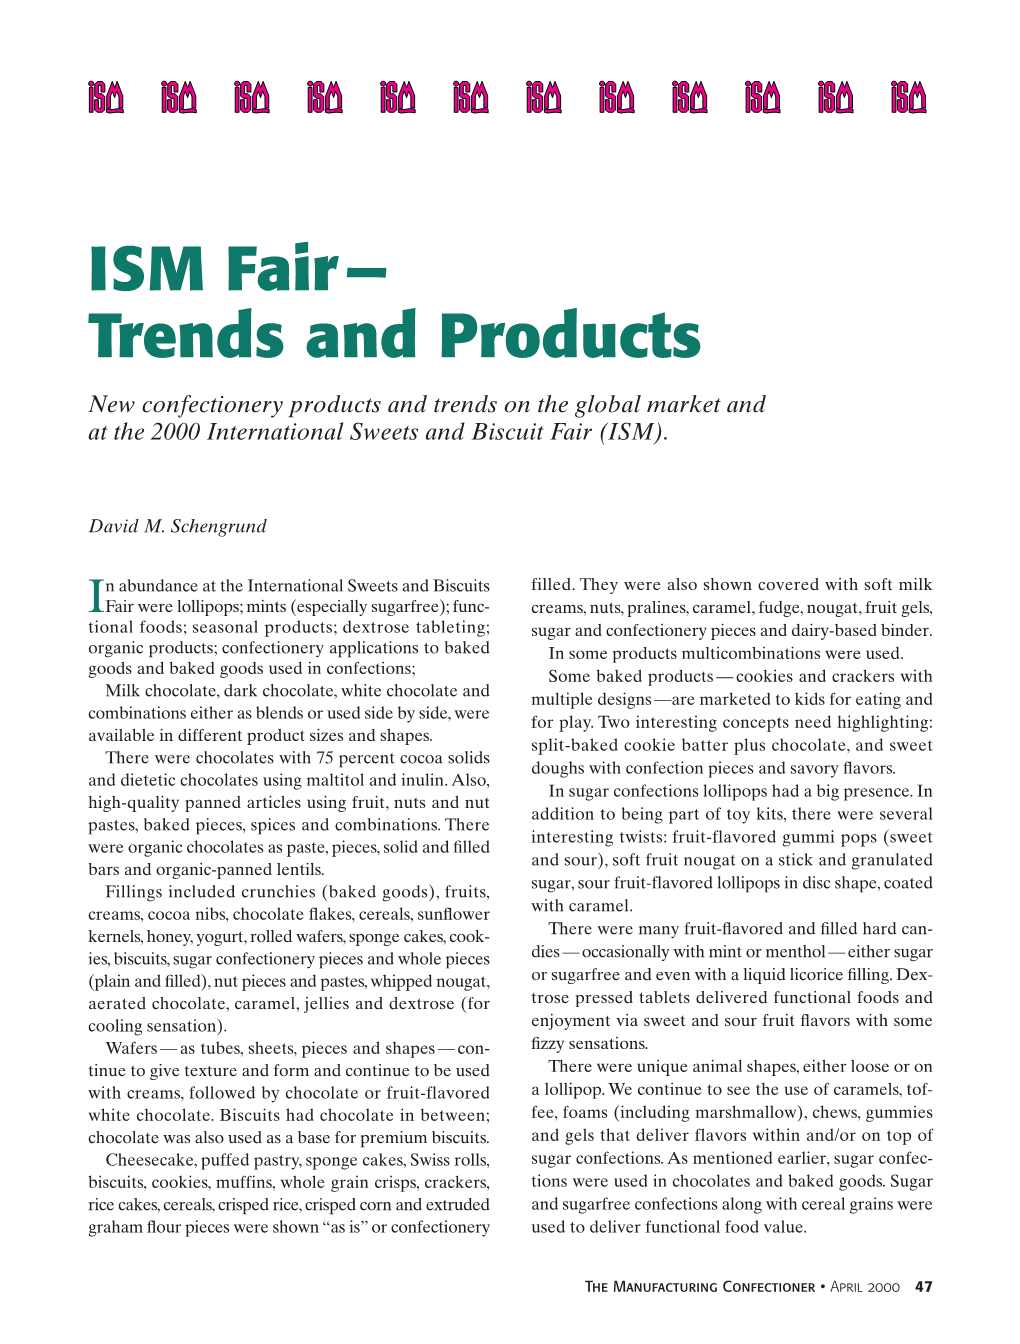 ISM Fair— Trends and Products New Confectionery Products and Trends on the Global Market and at the 2000 International Sweets and Biscuit Fair (ISM)